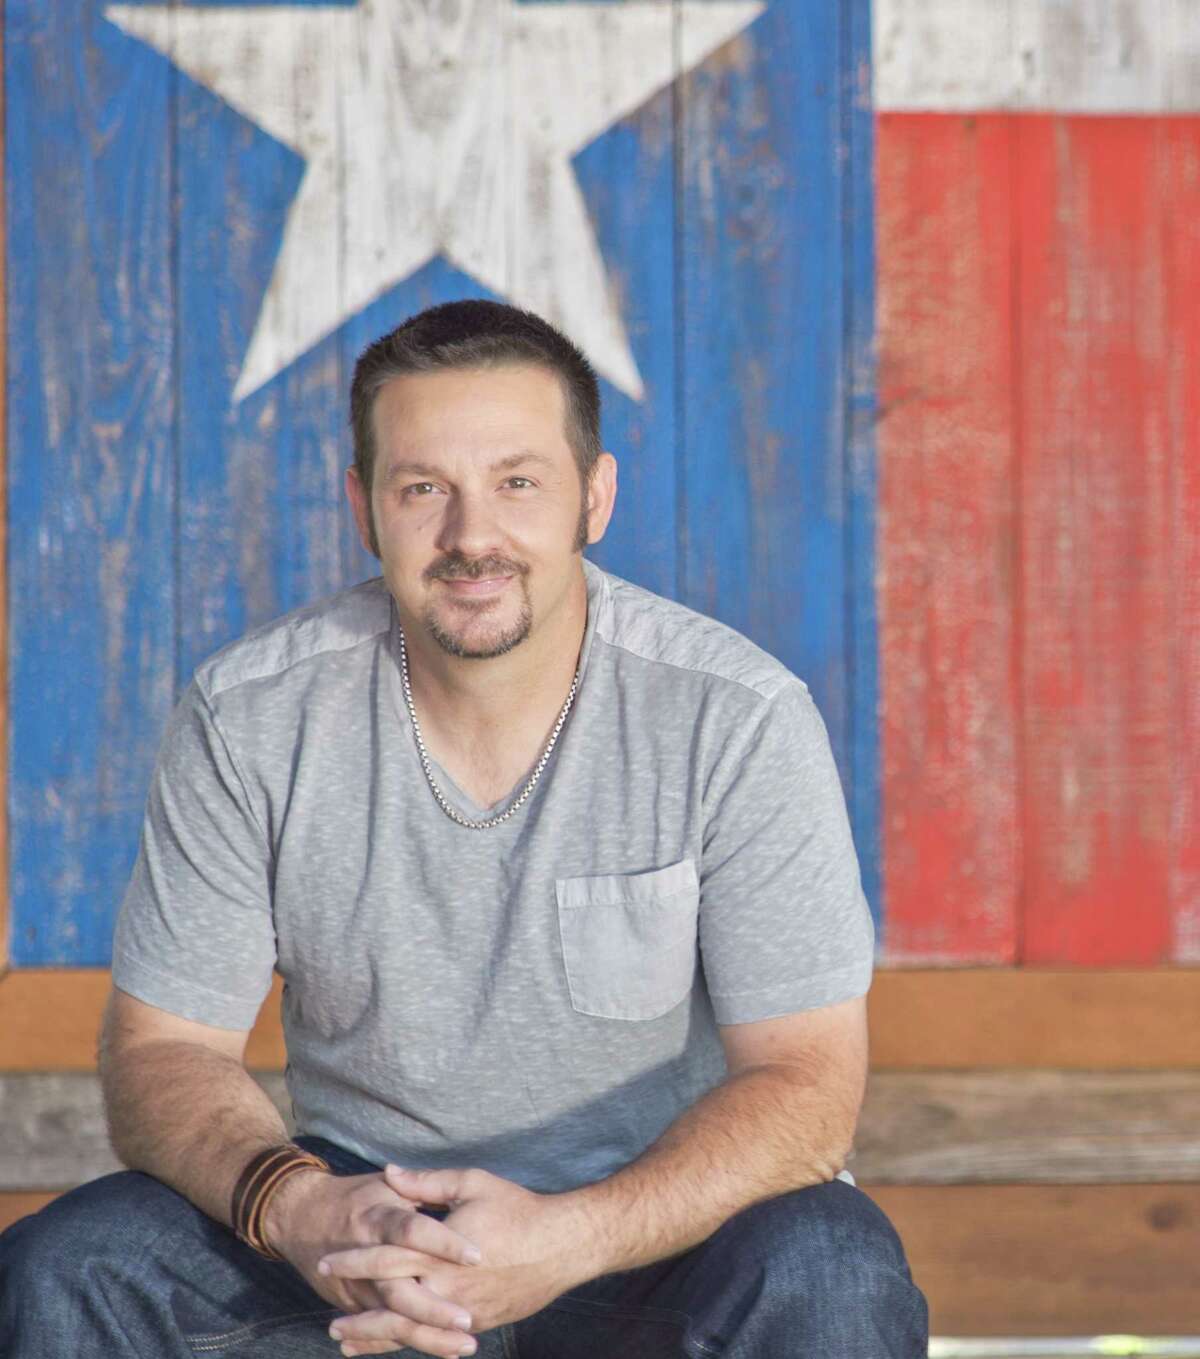 Josh Fuller will be performing April 22 at the first Southern Star BBQ Cook-Off on April 22. Other featured bands include The Warm Breeze Band, The Lime Traders, and Caleb & The Homegrown Tomatoes.